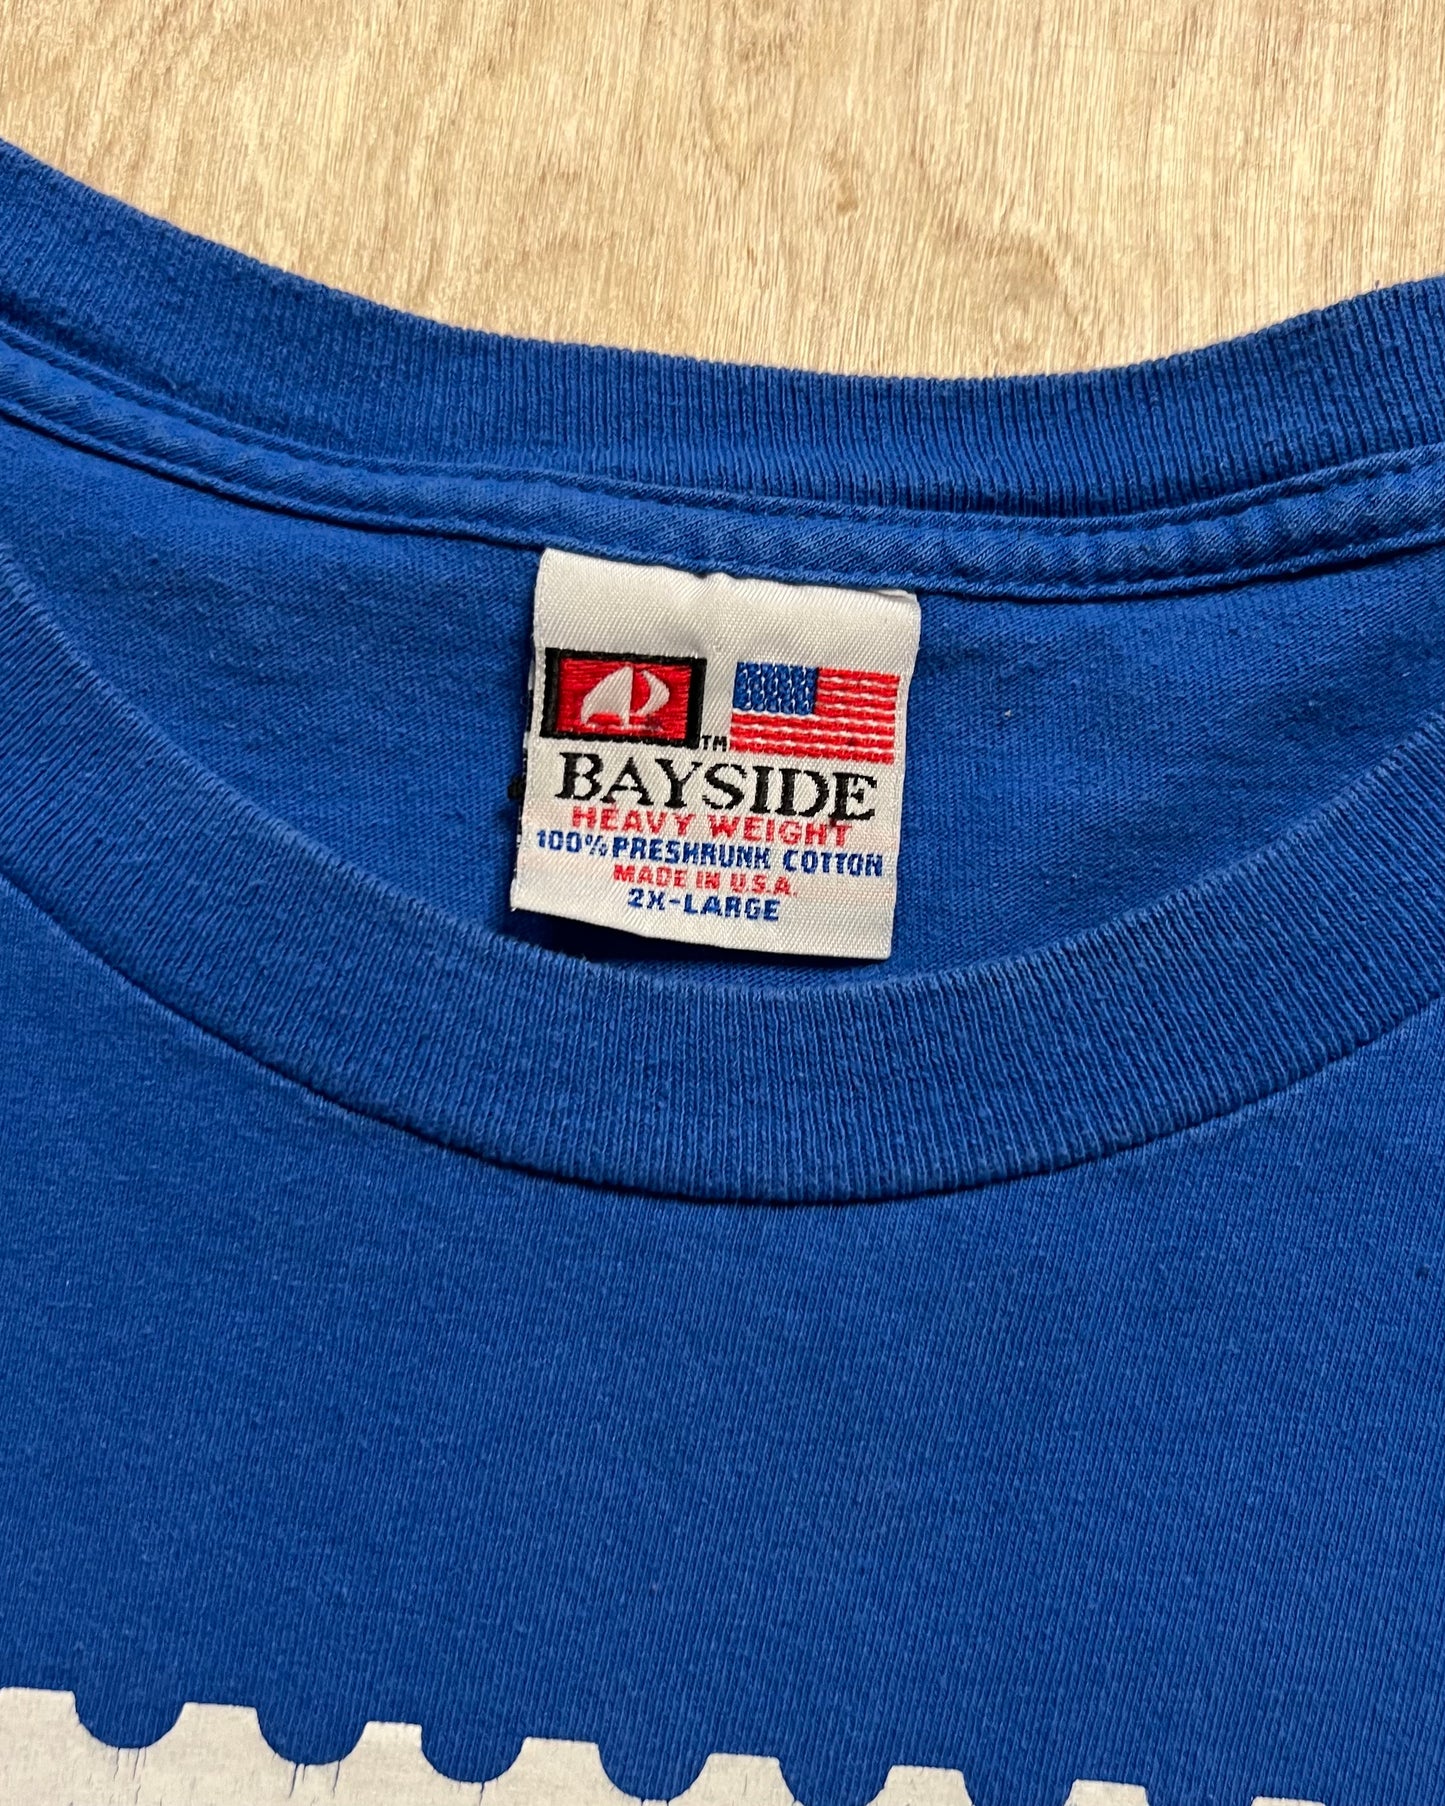 1990's US Mail "Not For Sale" T-Shirt